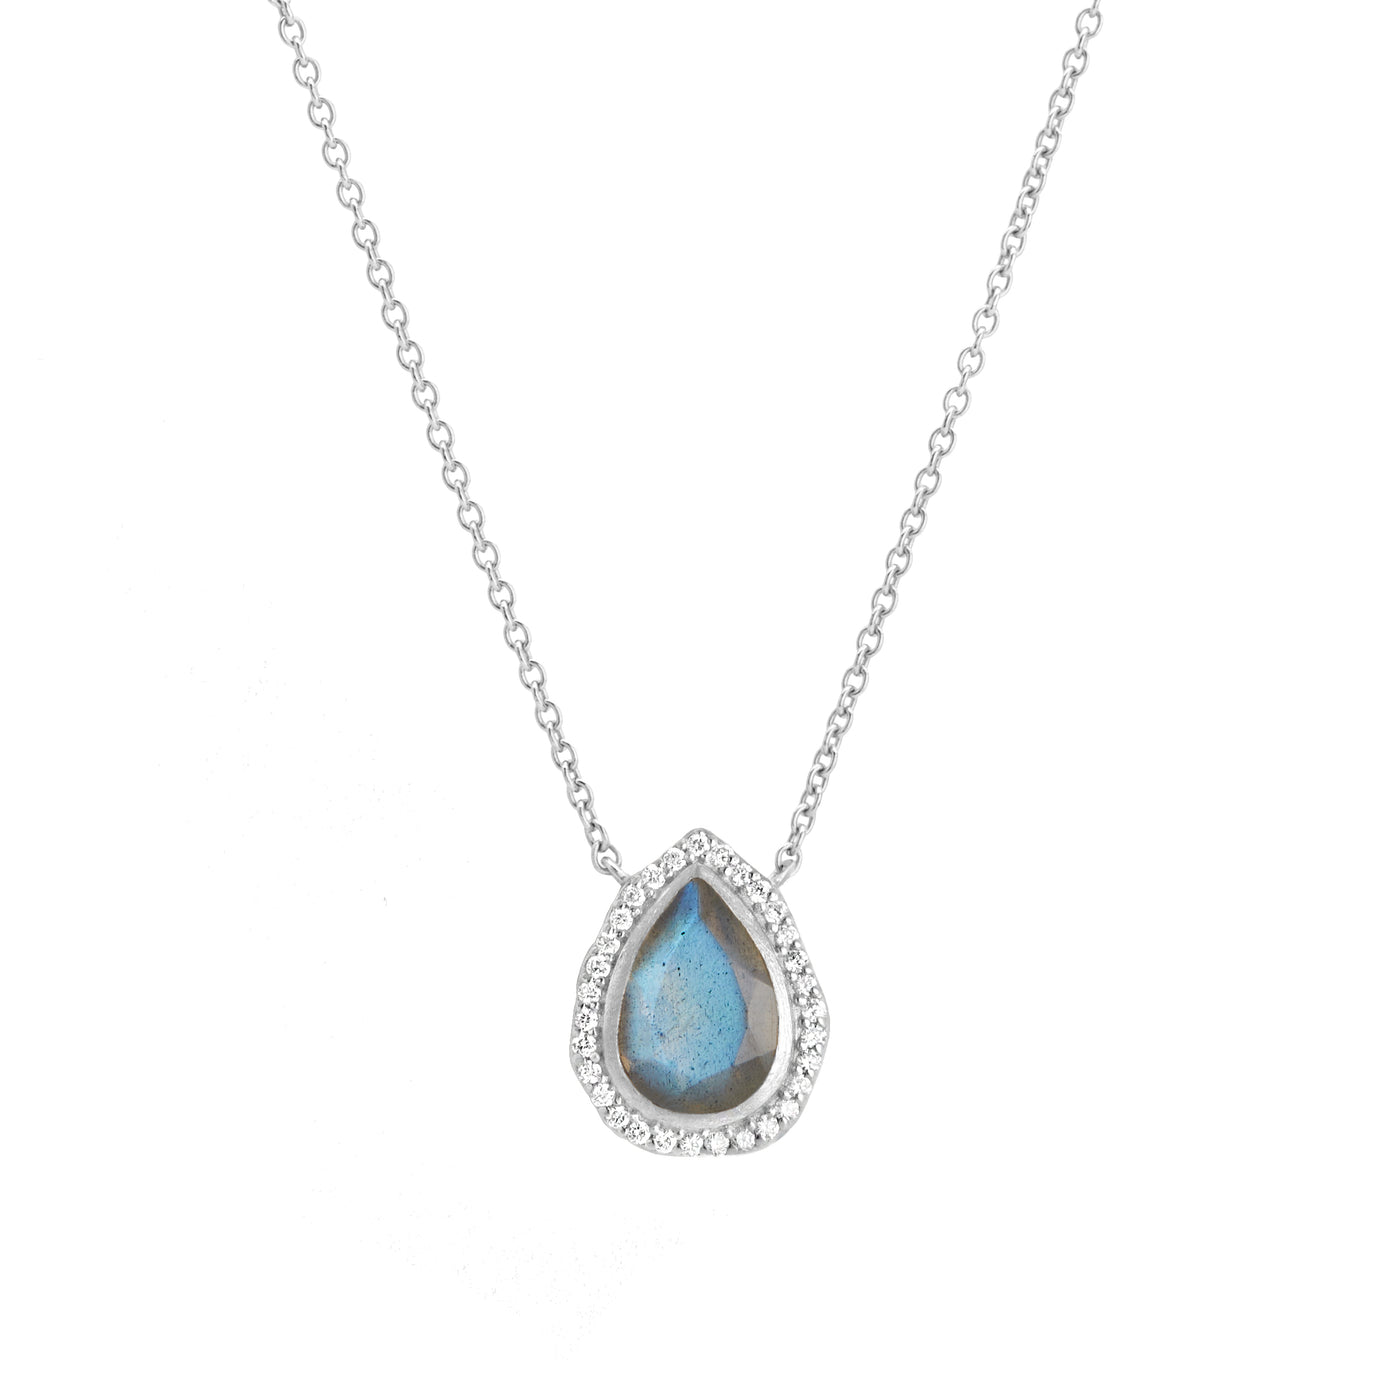 14 Karat White Gold Necklace with Pear Shaped Labradorite Stone with Halo of White Diamonds Against White Background